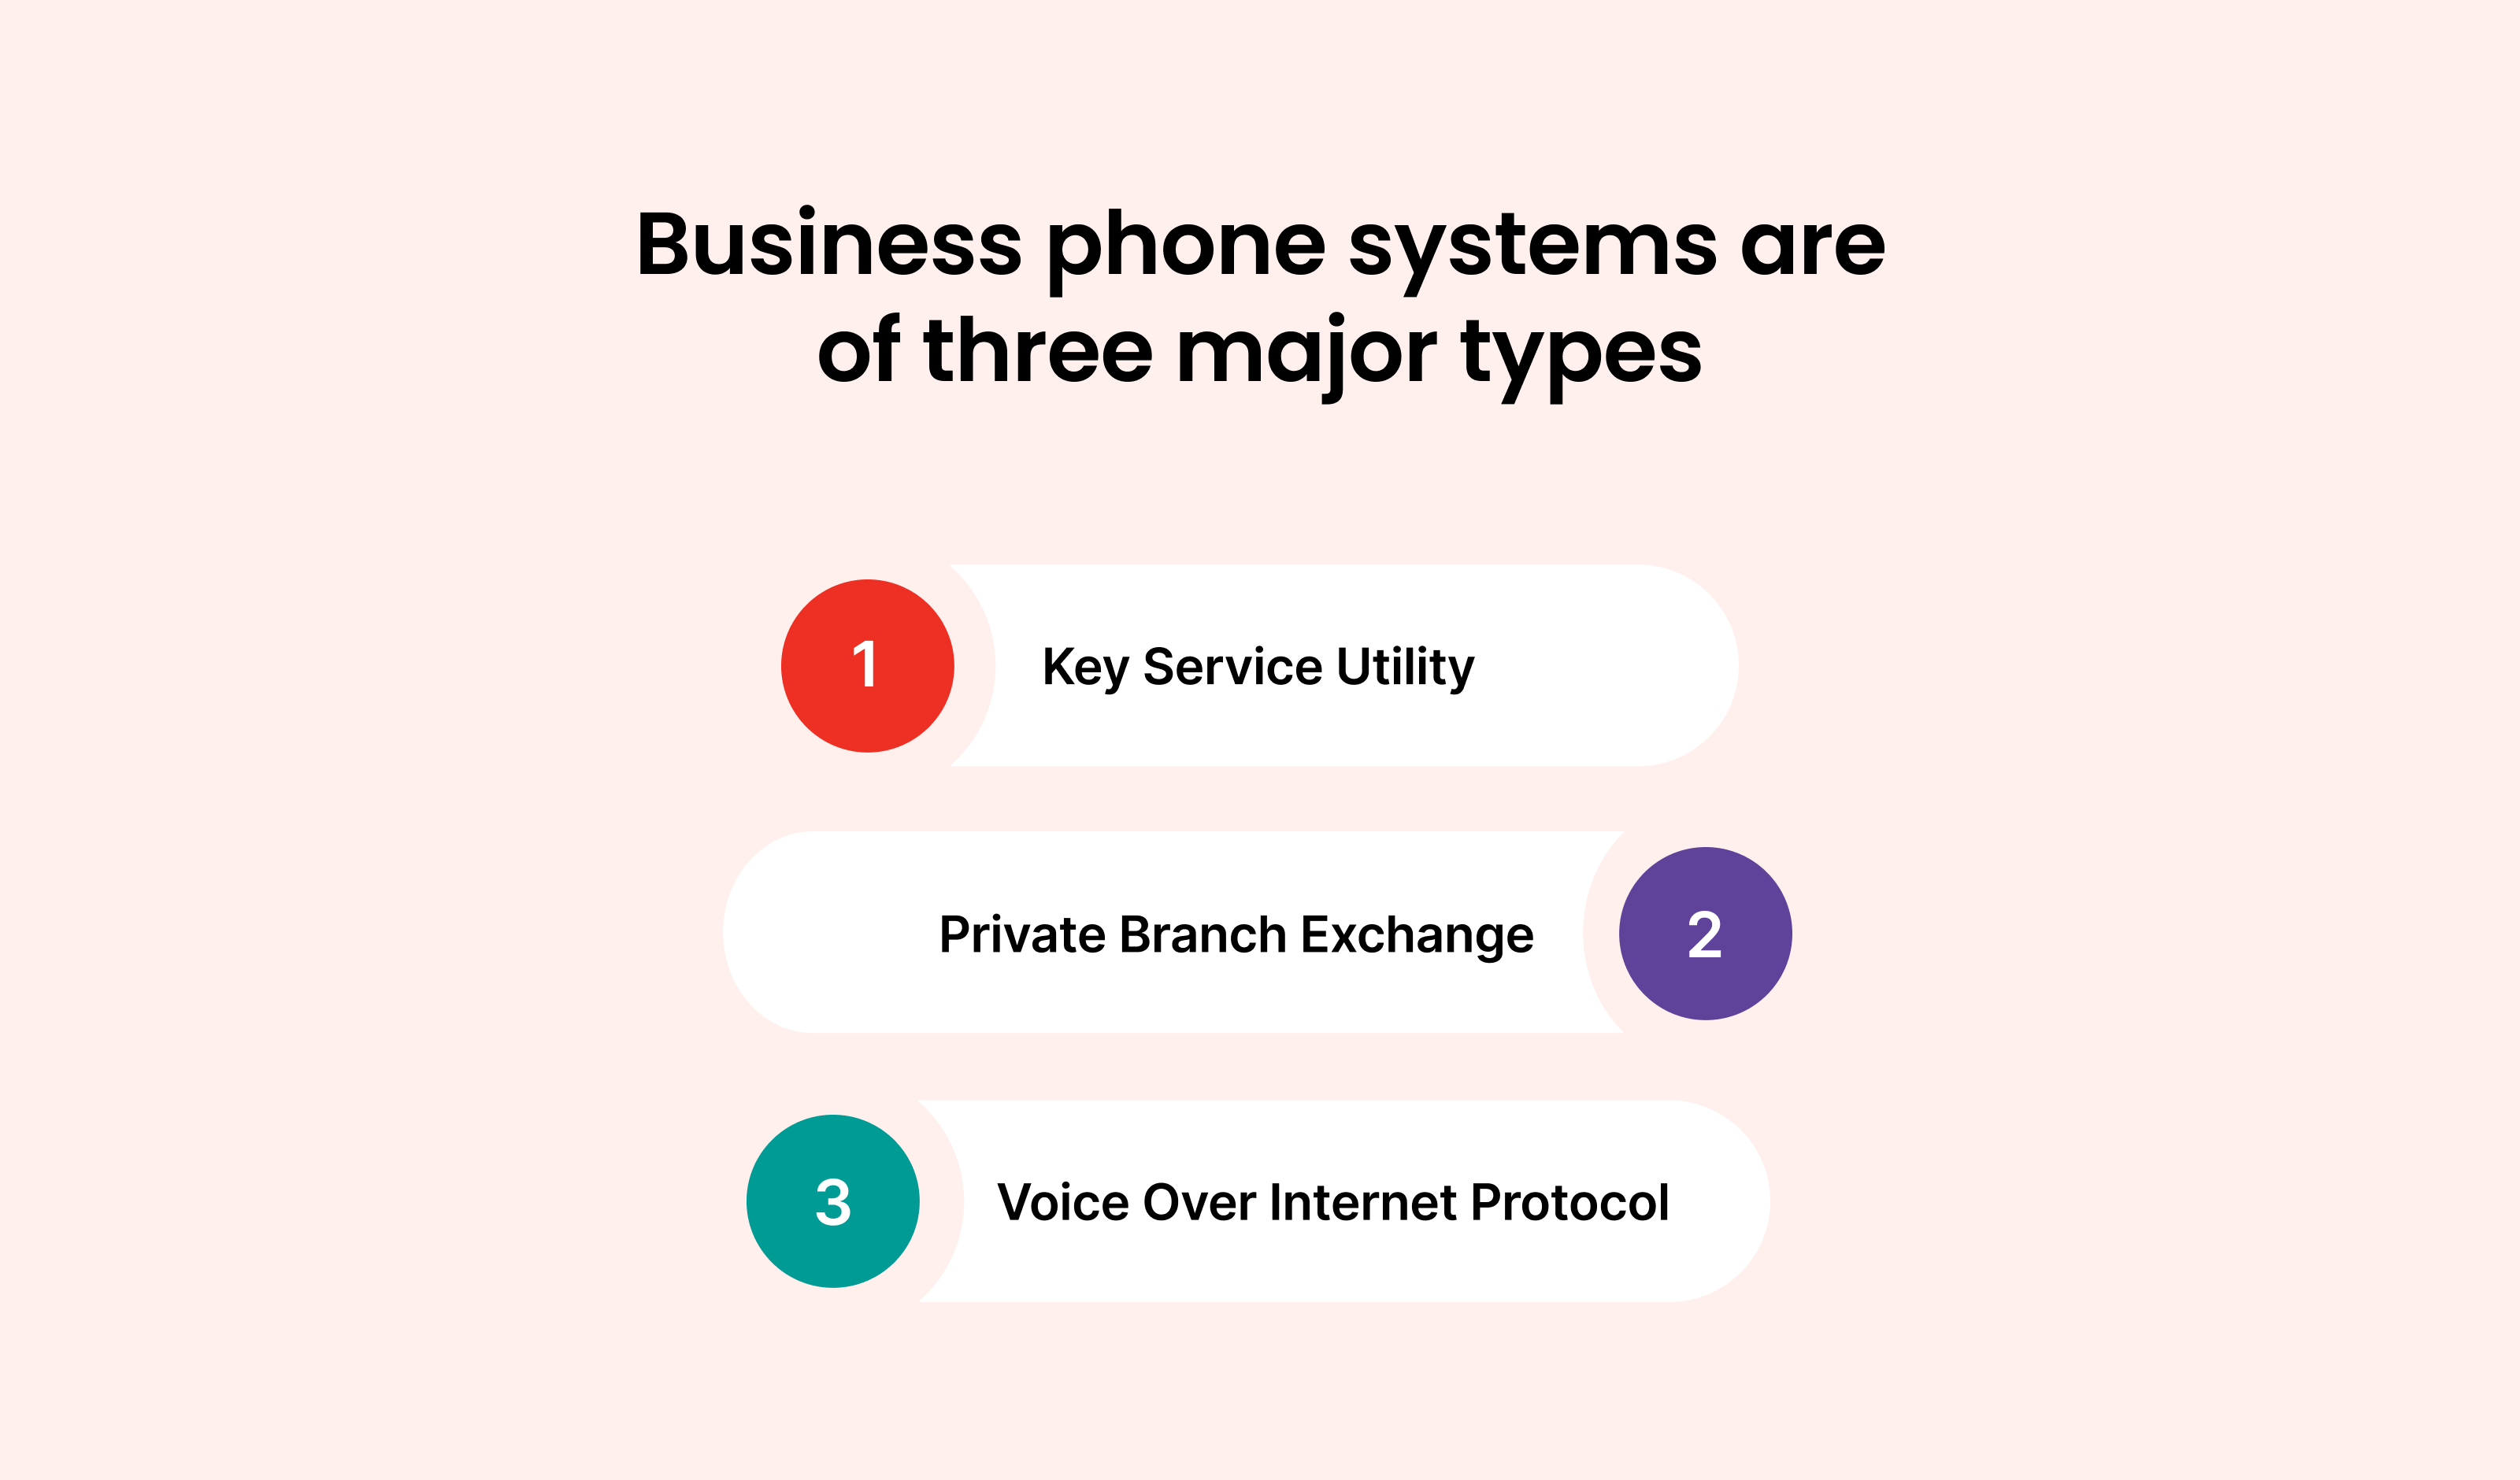 Business Phone Systems are of three major types: